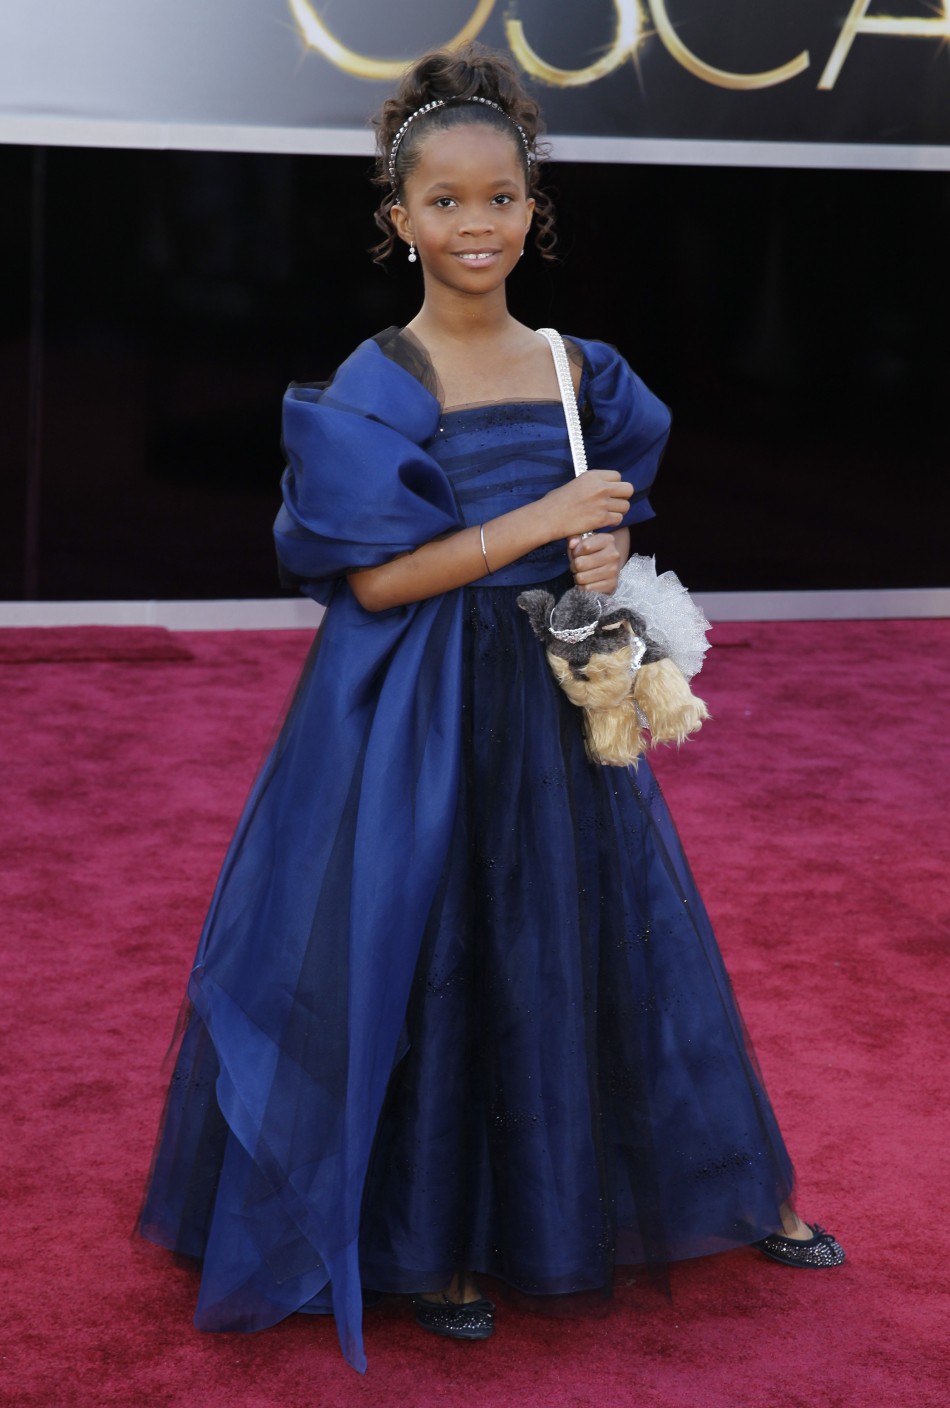 Quenzhane Wallis, best actress nominee for her role in Beasts of the Southern Wild, arrives at the 85th Academy Awards in Hollywood, California, February 24, 2013.